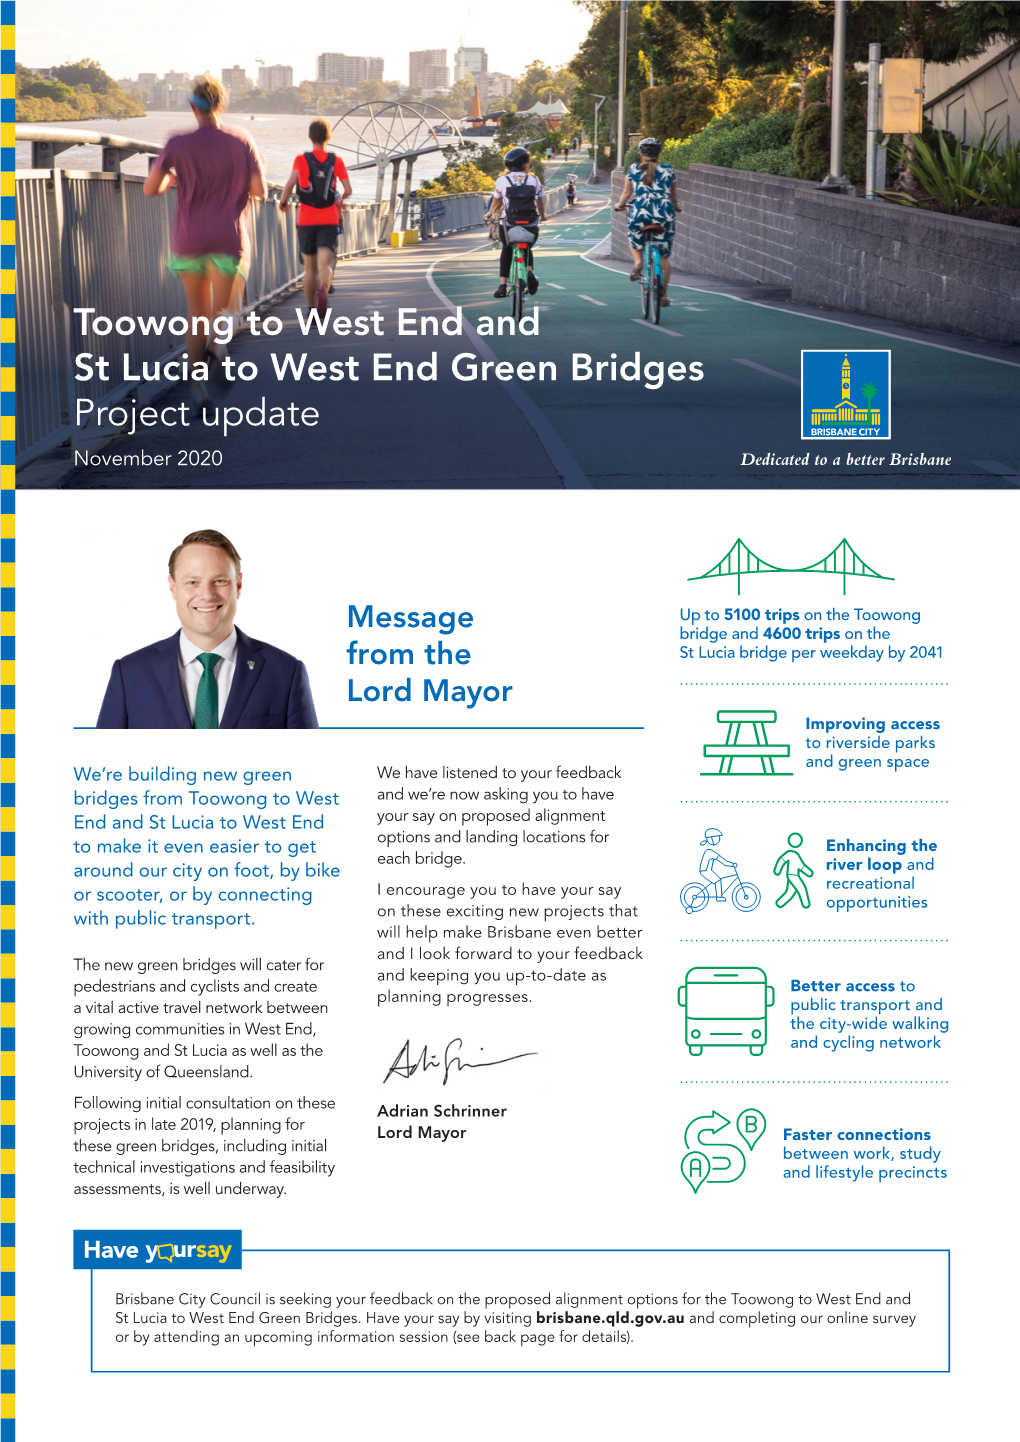 Toowong to West End and St Lucia to West End Green Bridges Project Update November 2020